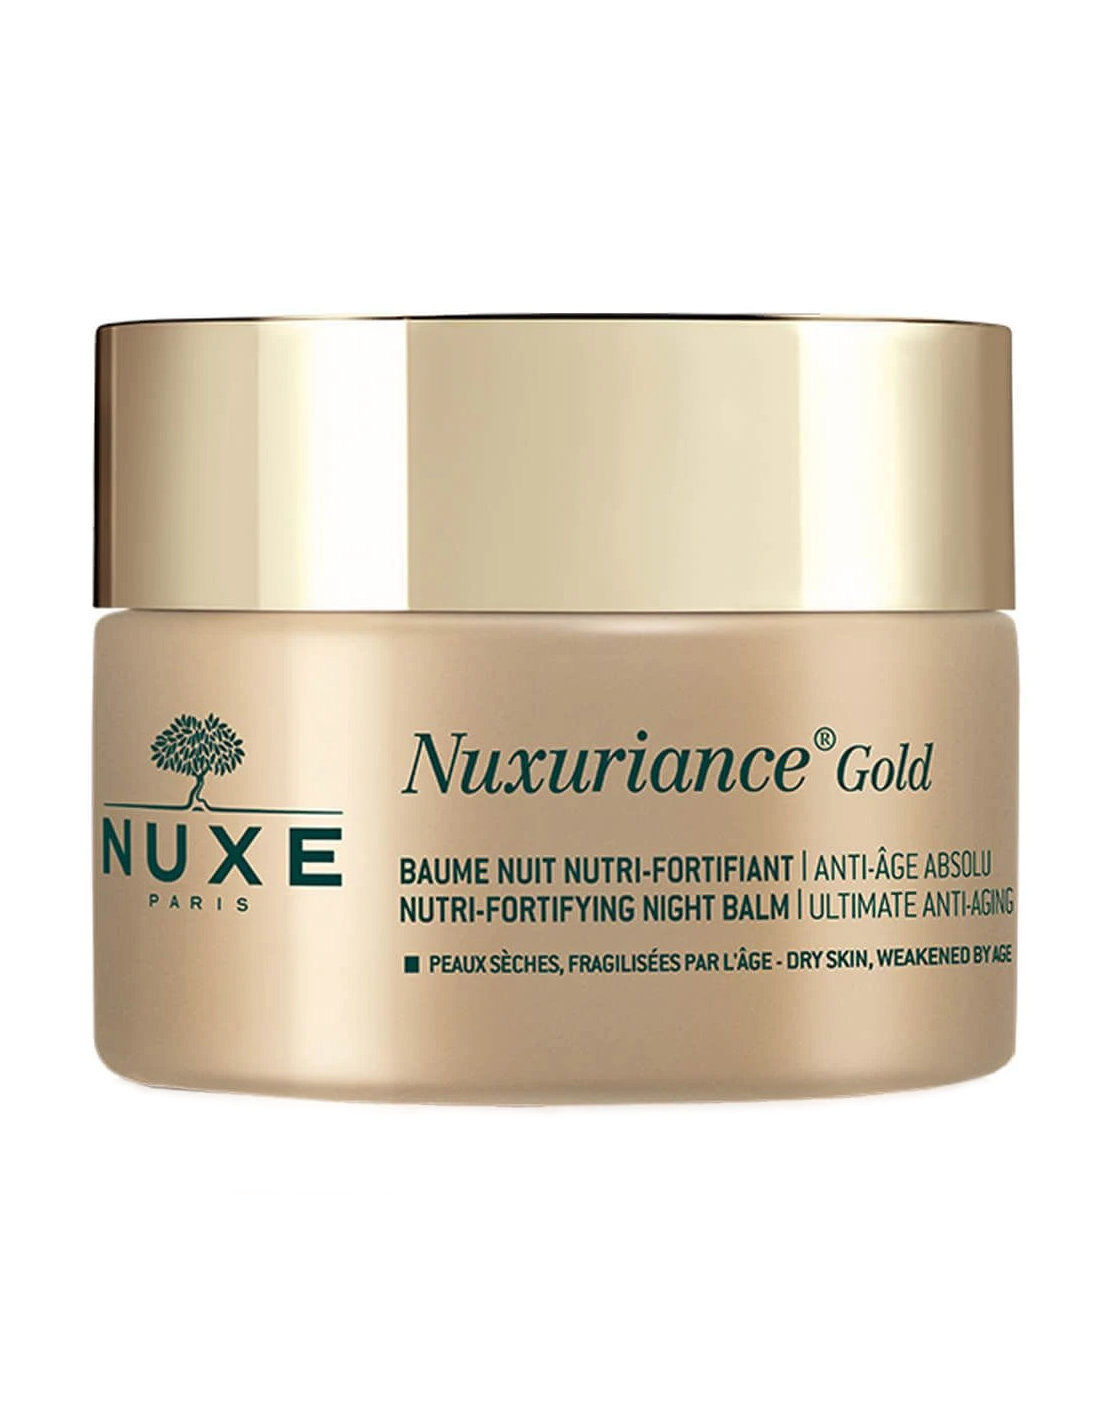 NUXE Nuxuriance Gold - Crema Notte Nutri-Fortificante 50ml